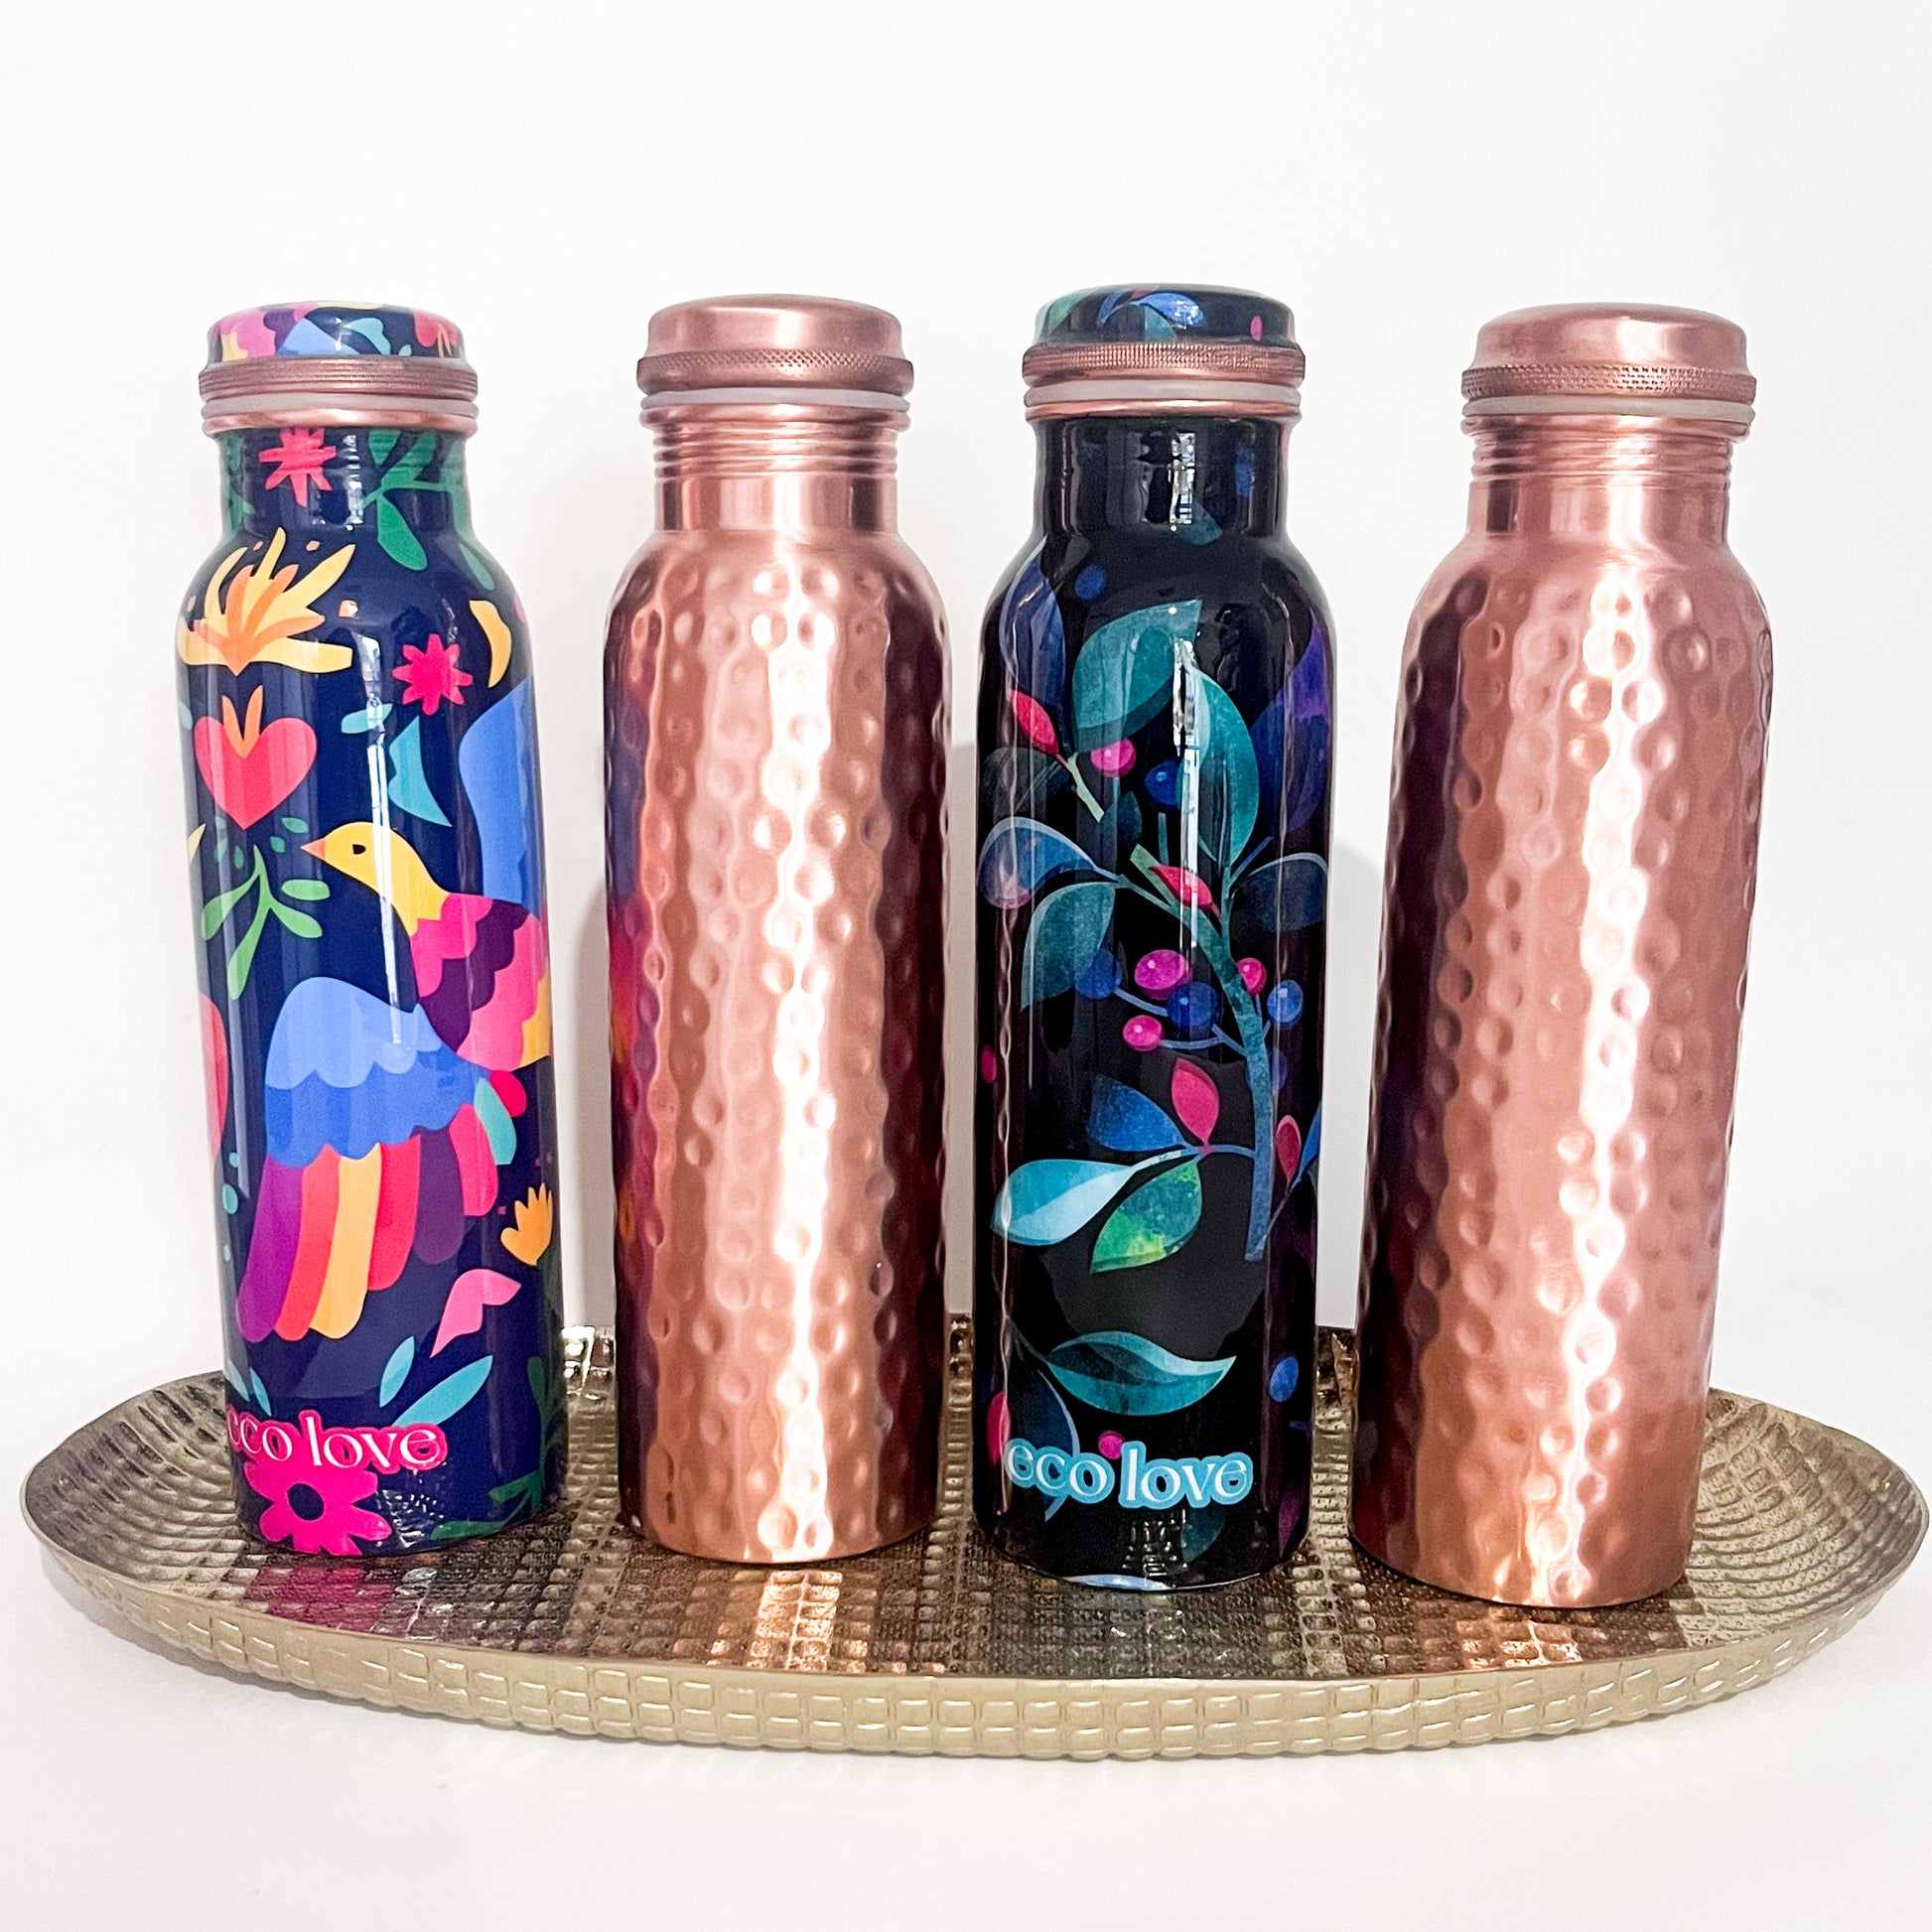 Image of Copper 1L bottles on gold tray